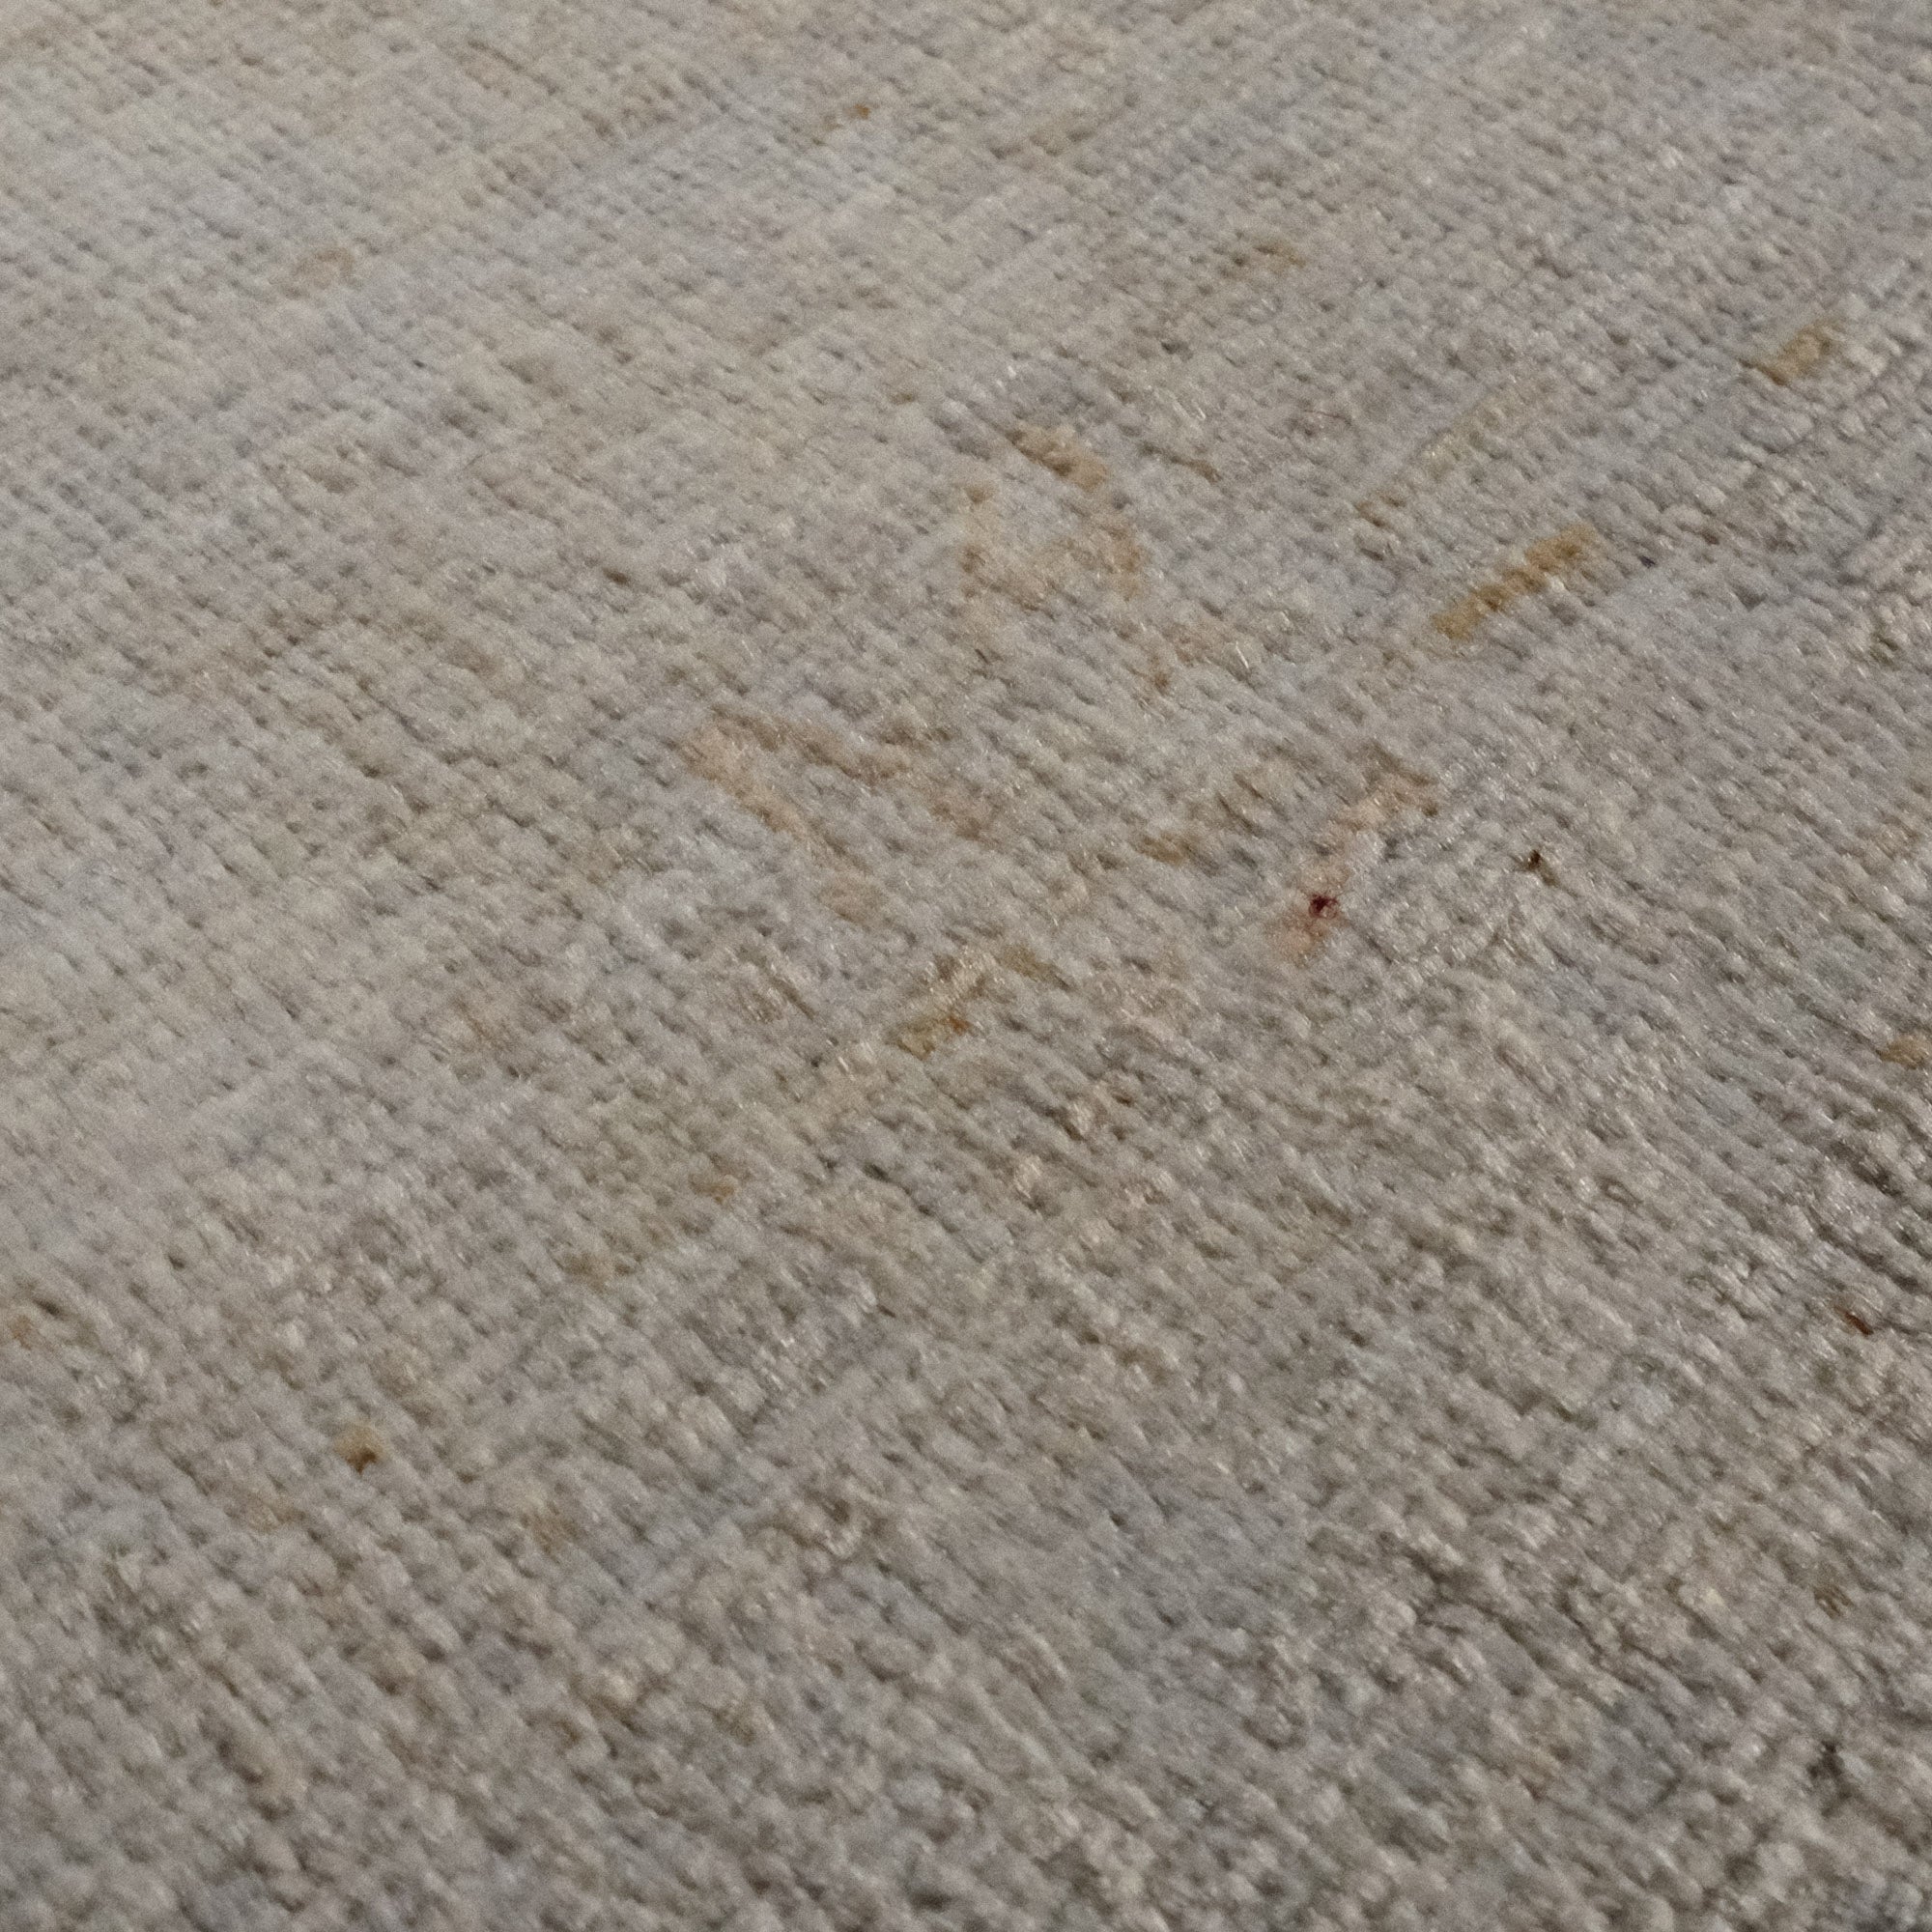 Retro Series Hand-Woven Vintage Patterned Gray Carpet